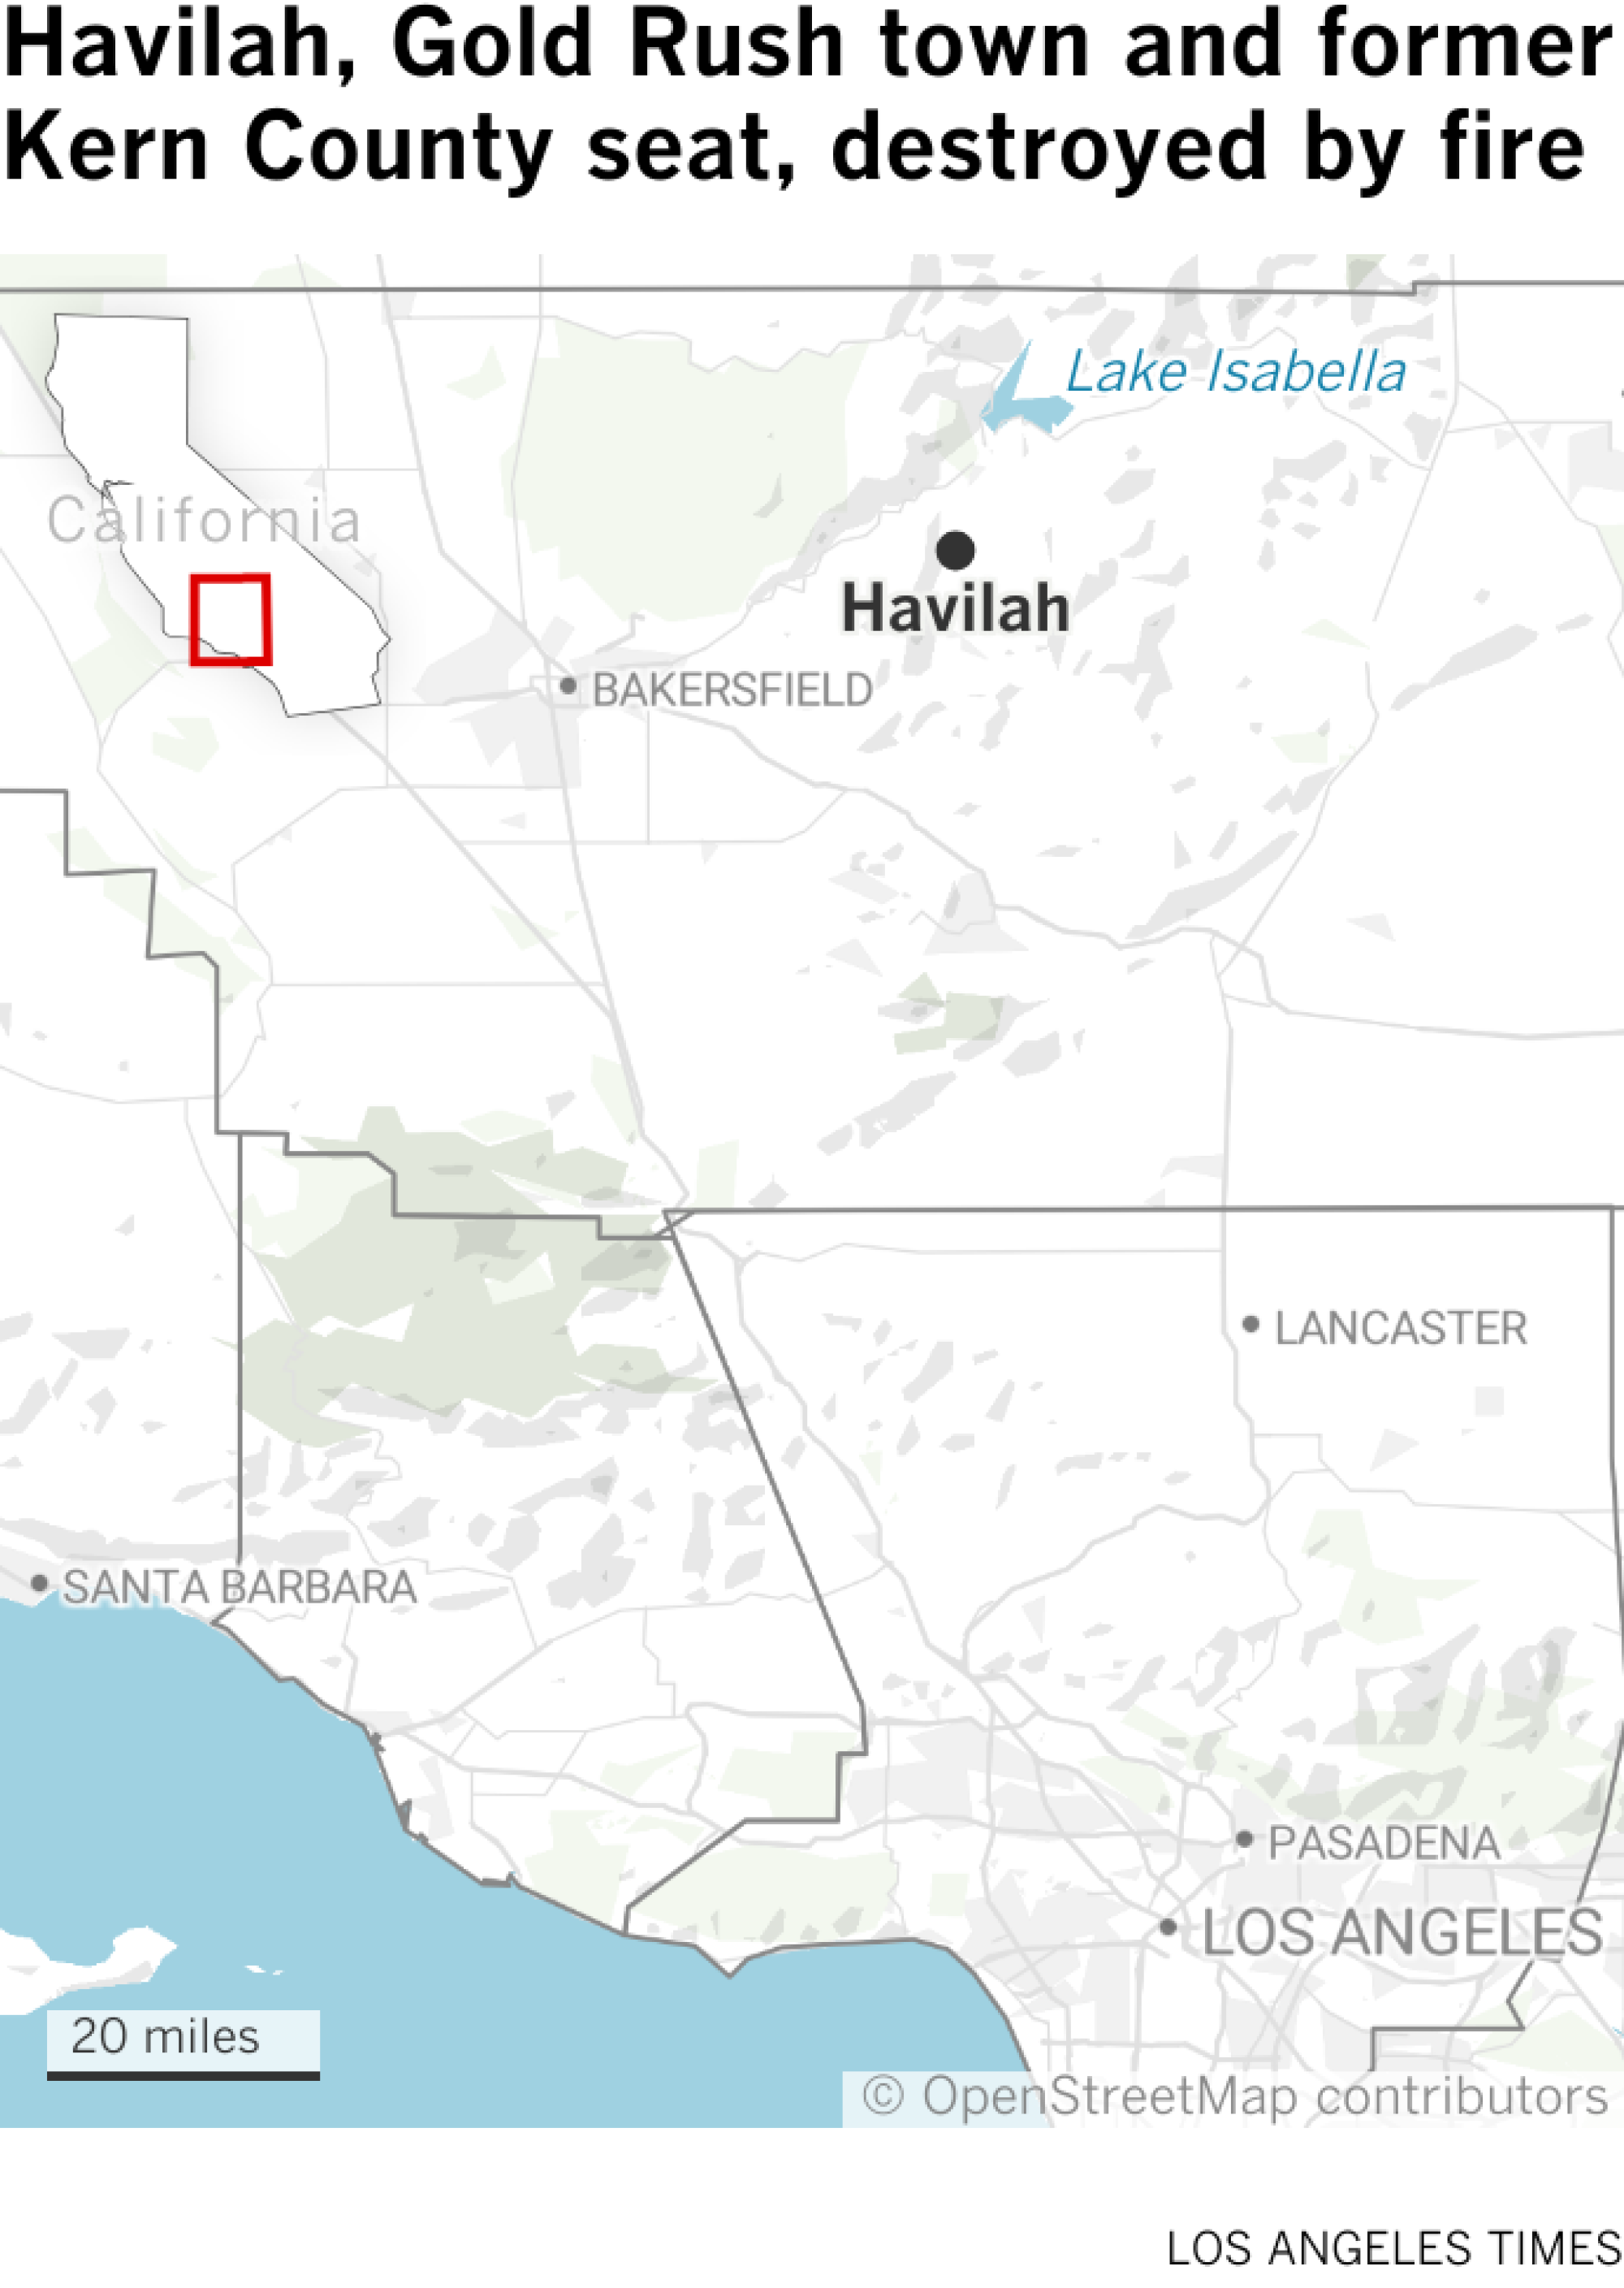 Havilah, Gold Rush town and former Kern County seat, destroyed by fire